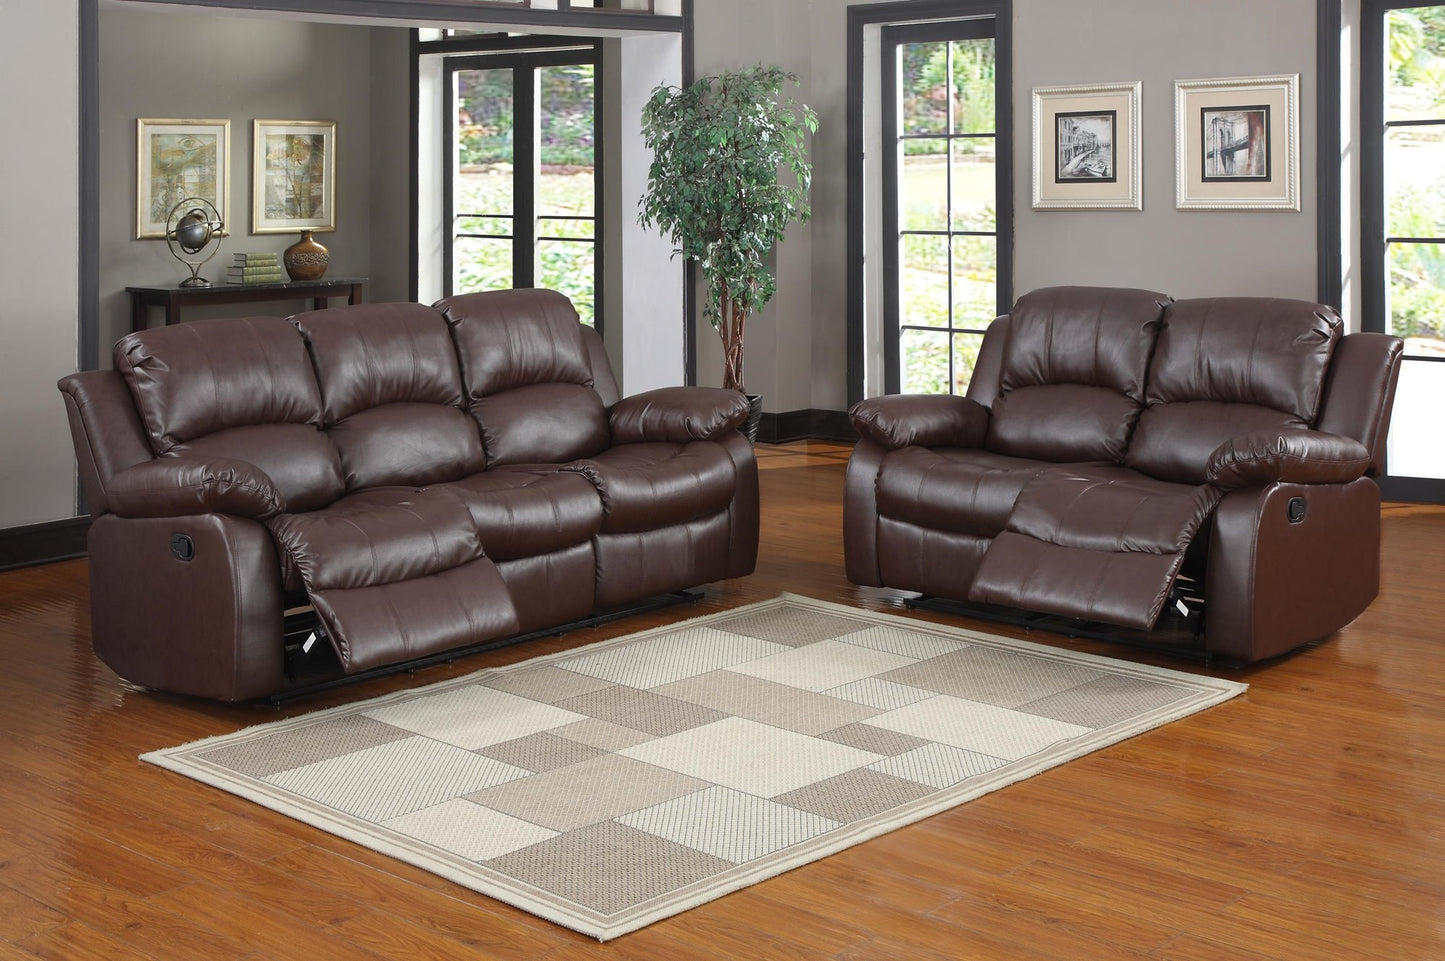 Homelegance Cranley 2PC Set Double Reclining Sofa & Recliner Chair in Leather - Brown